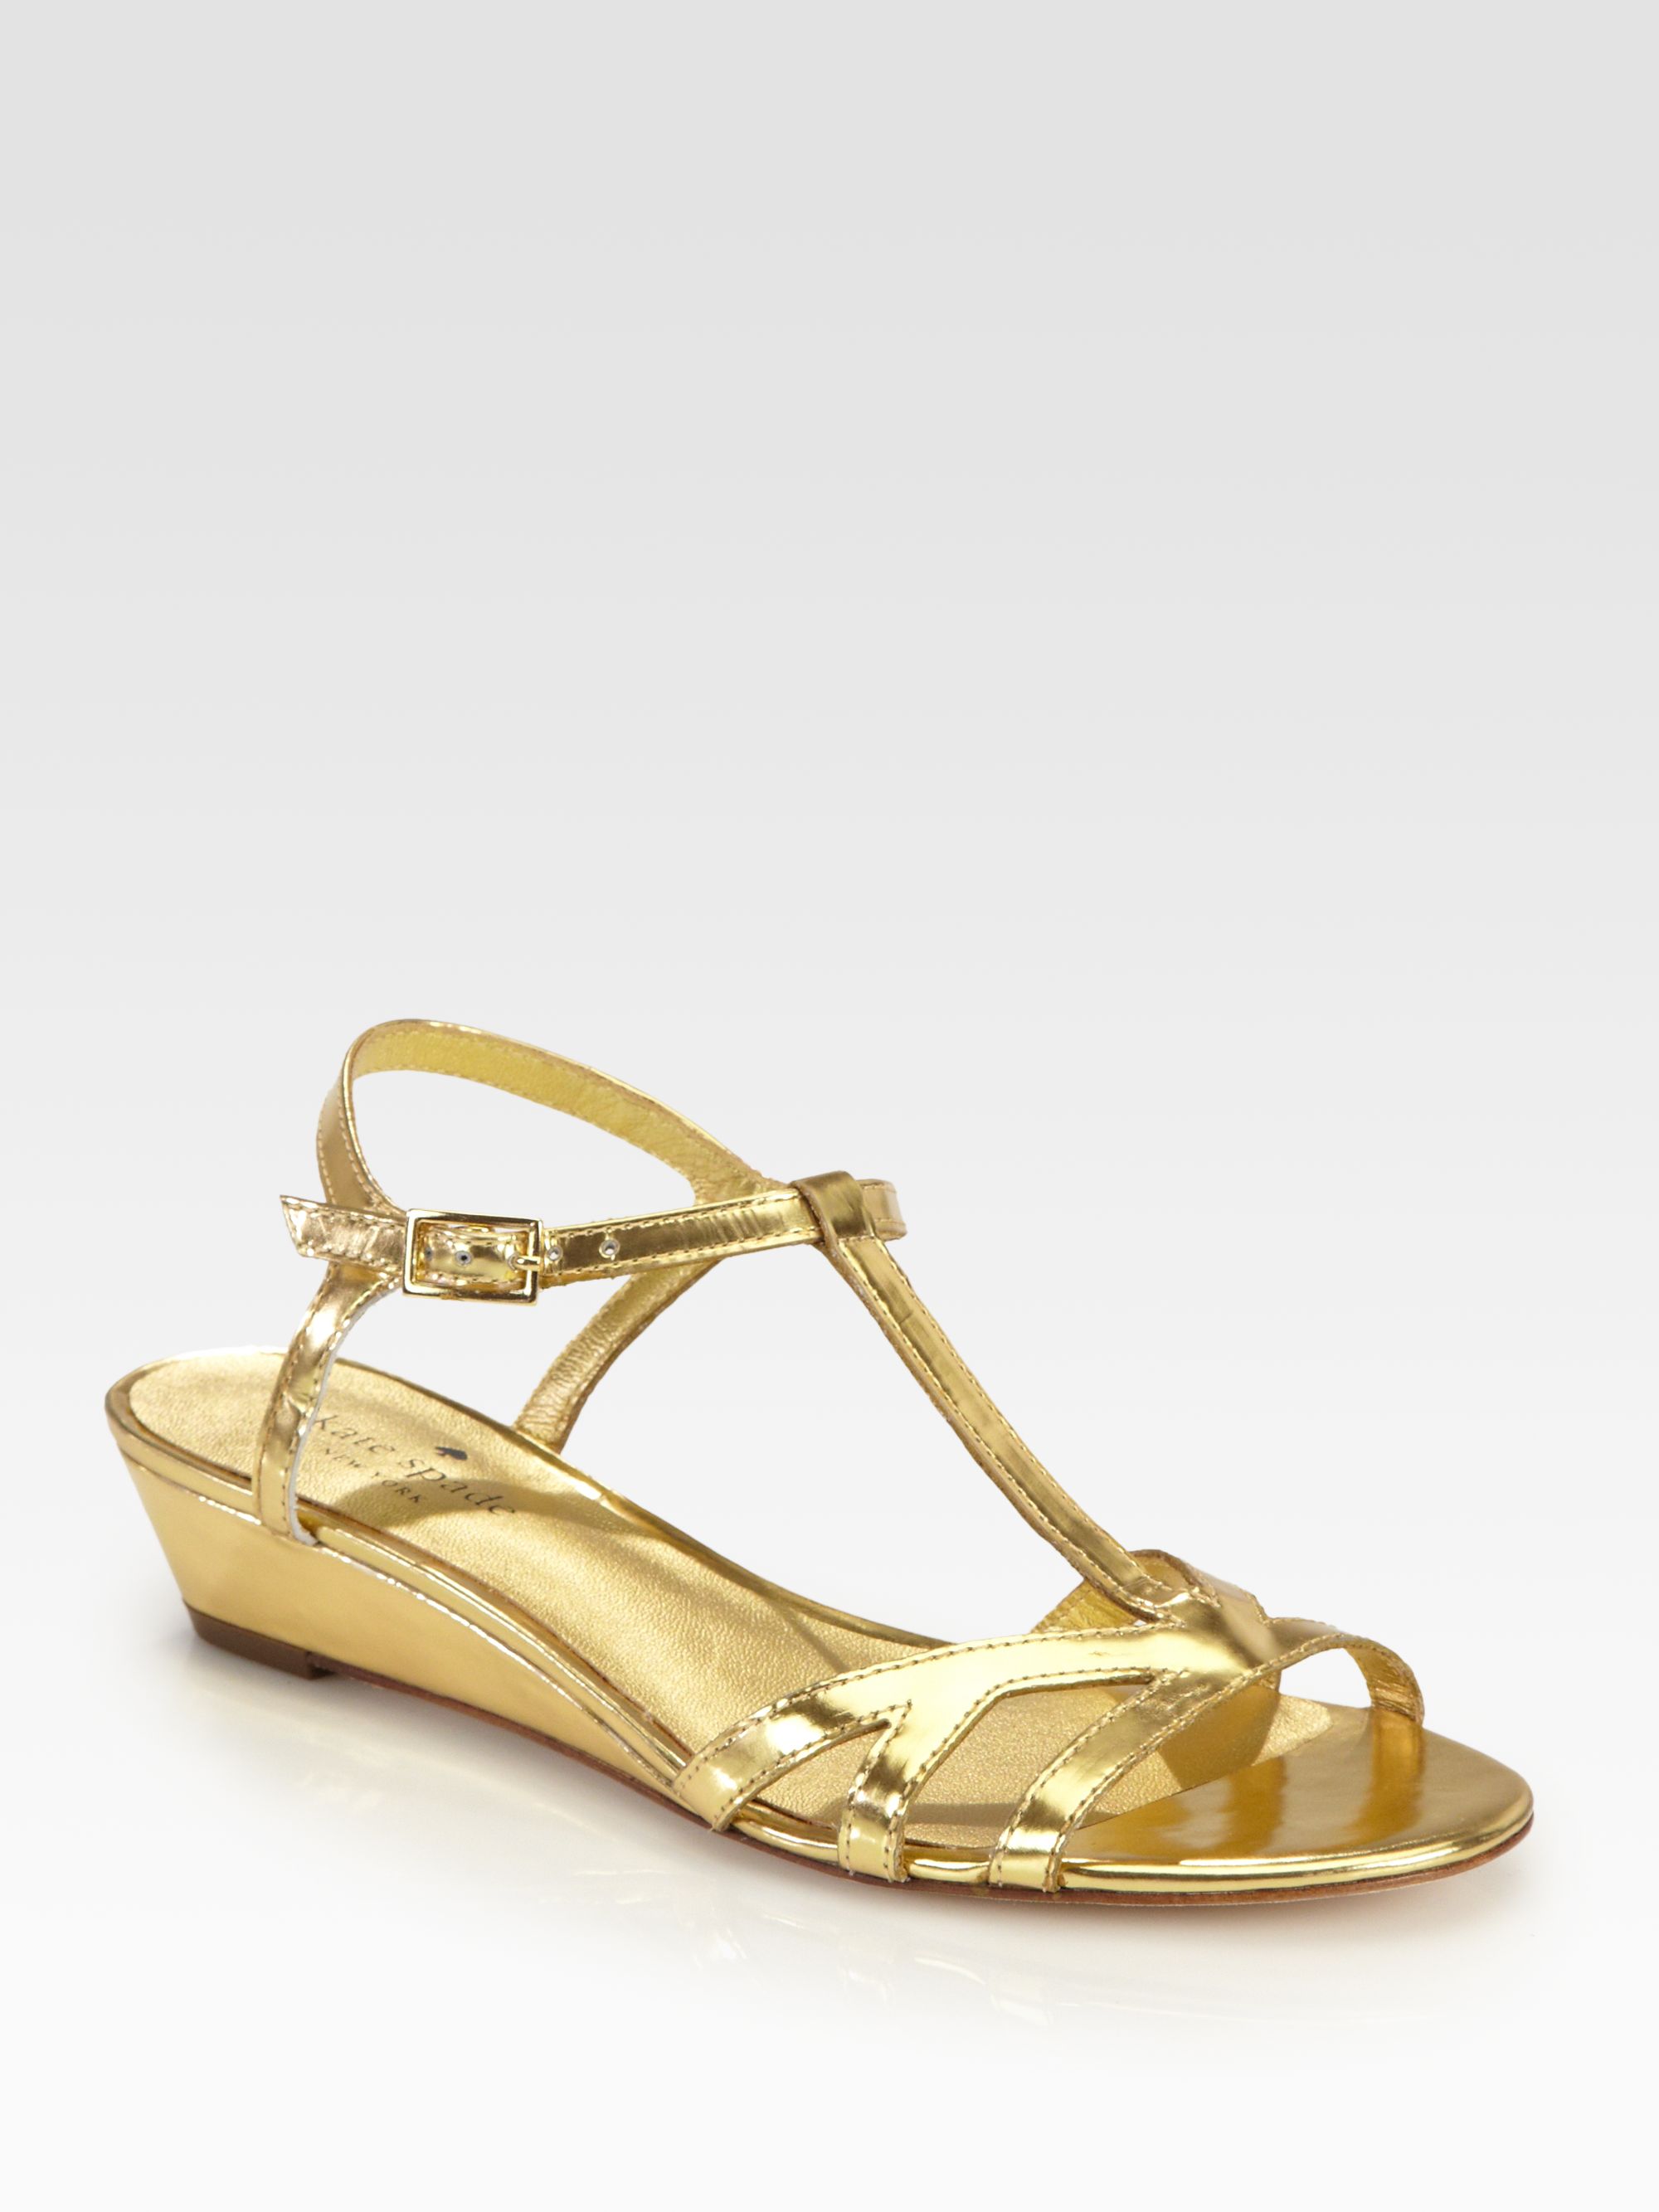 Kate Spade Violet Metallic Leather Wedge Sandals in Gold | Lyst